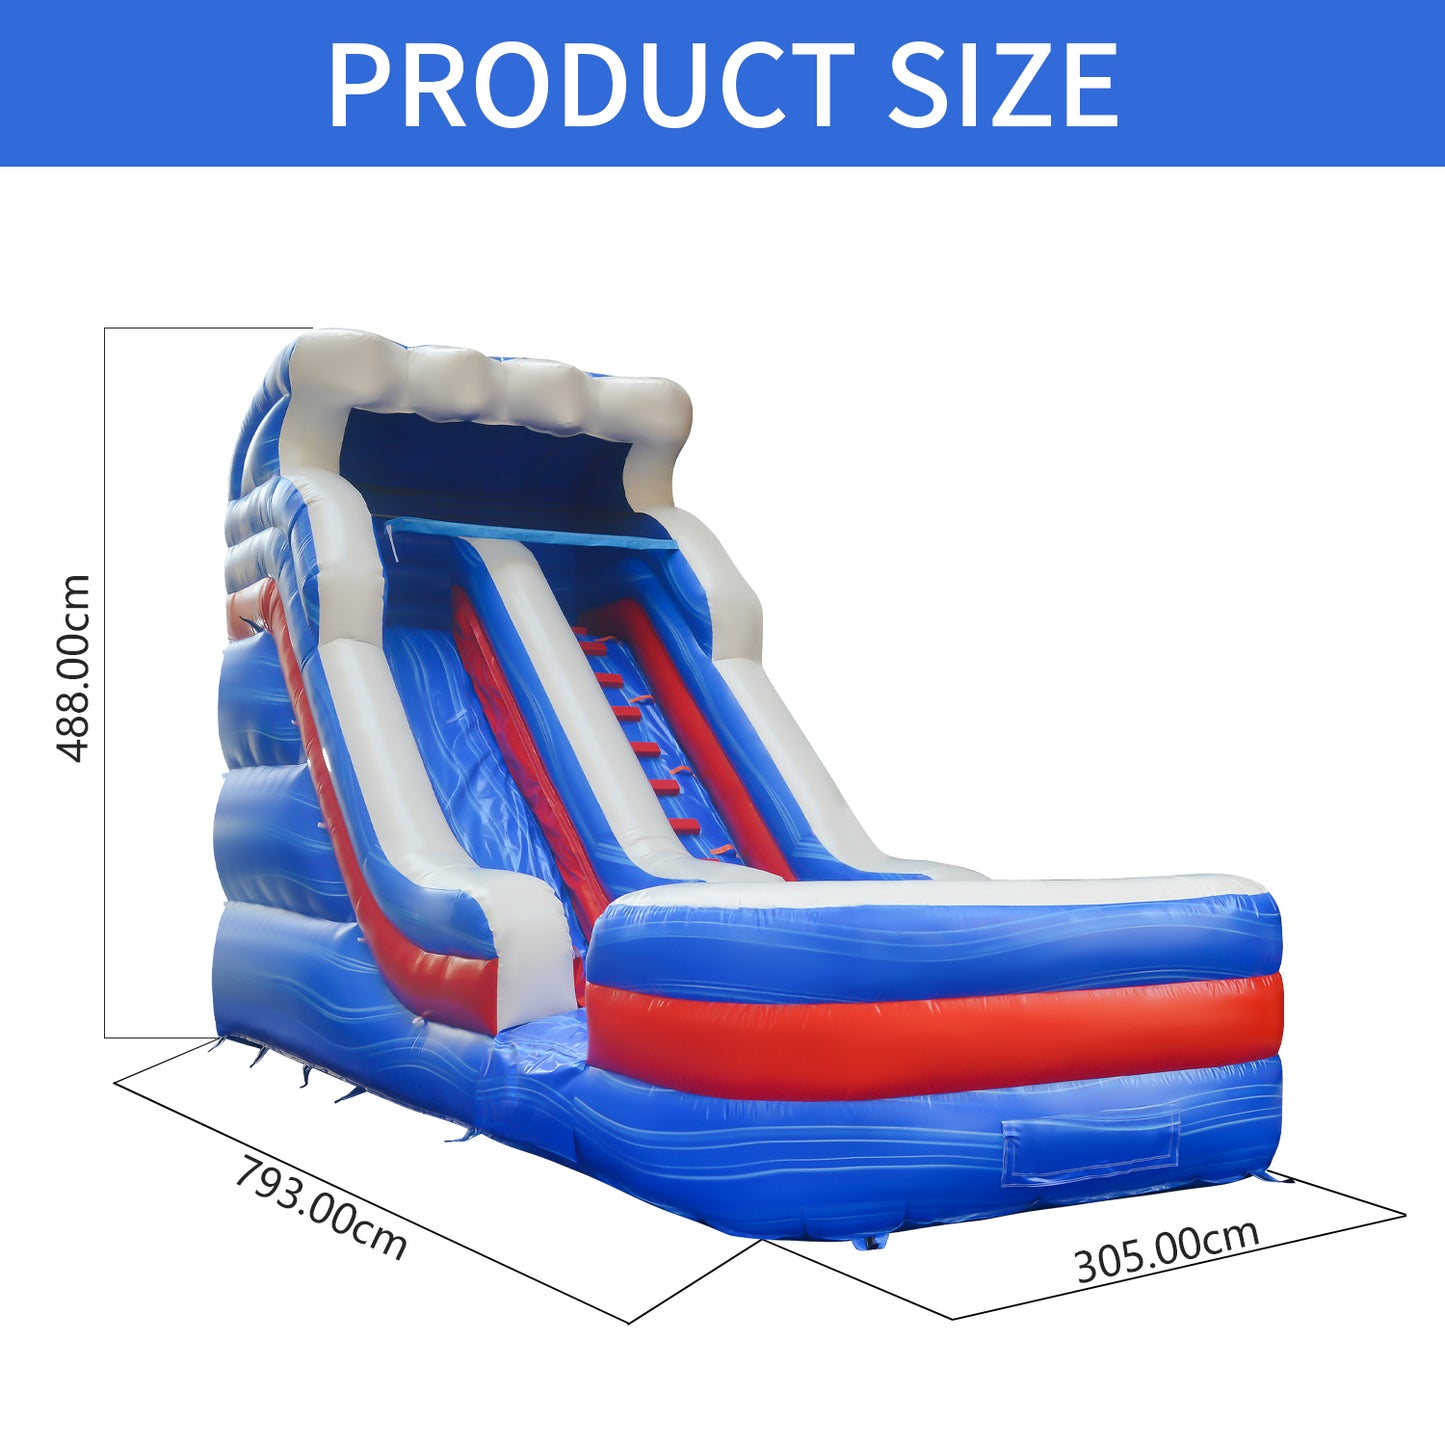 COMING  Wet/Dry Tidal Wave Commercial Inflatable Water Slide 26' x 10' x 16' #11167